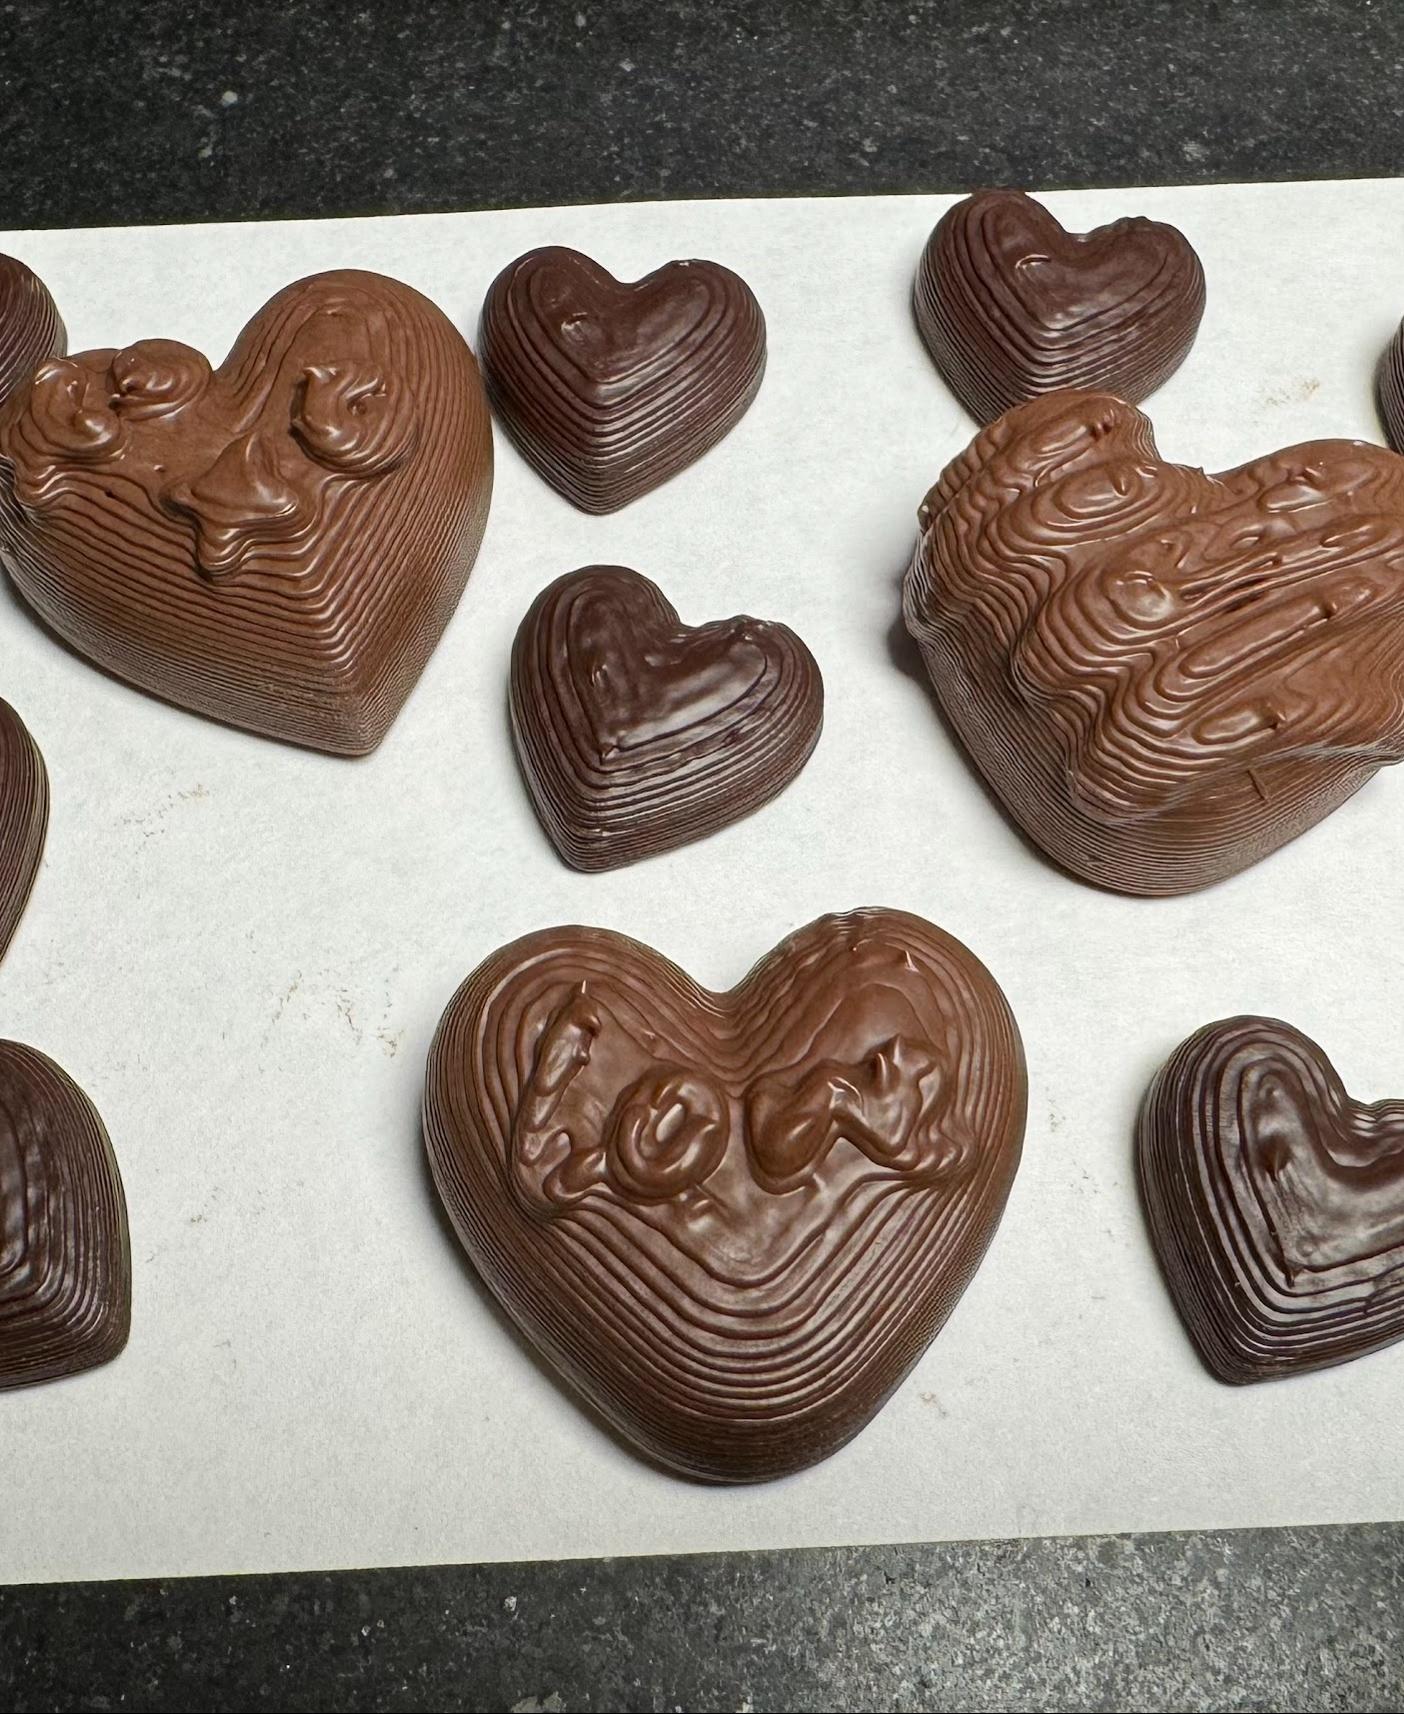 Chocolate Hearts #Valentines - "Tall" models in Milk Chocolate
60%-scaled plain hearts in Dark Chocolate - 3d model